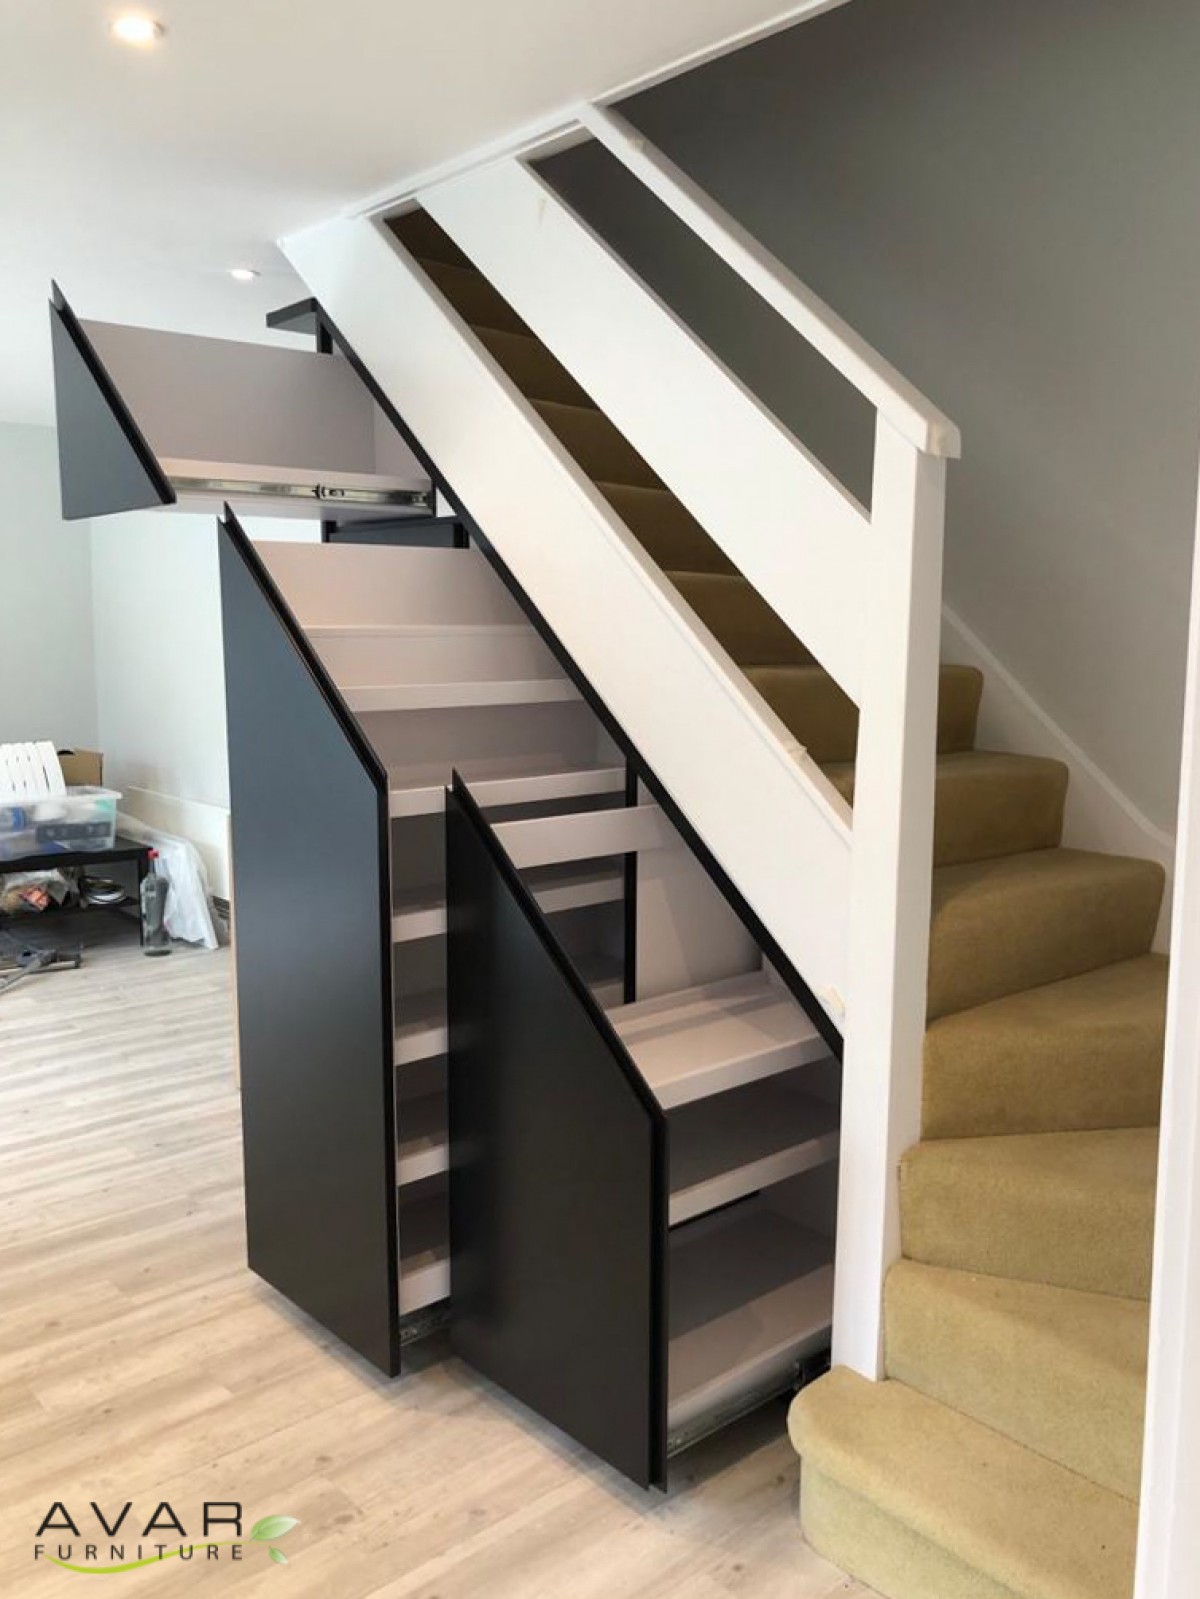 https://www.avarfurniture.co.uk/images/gallery/390/under-stairs-9.jpg